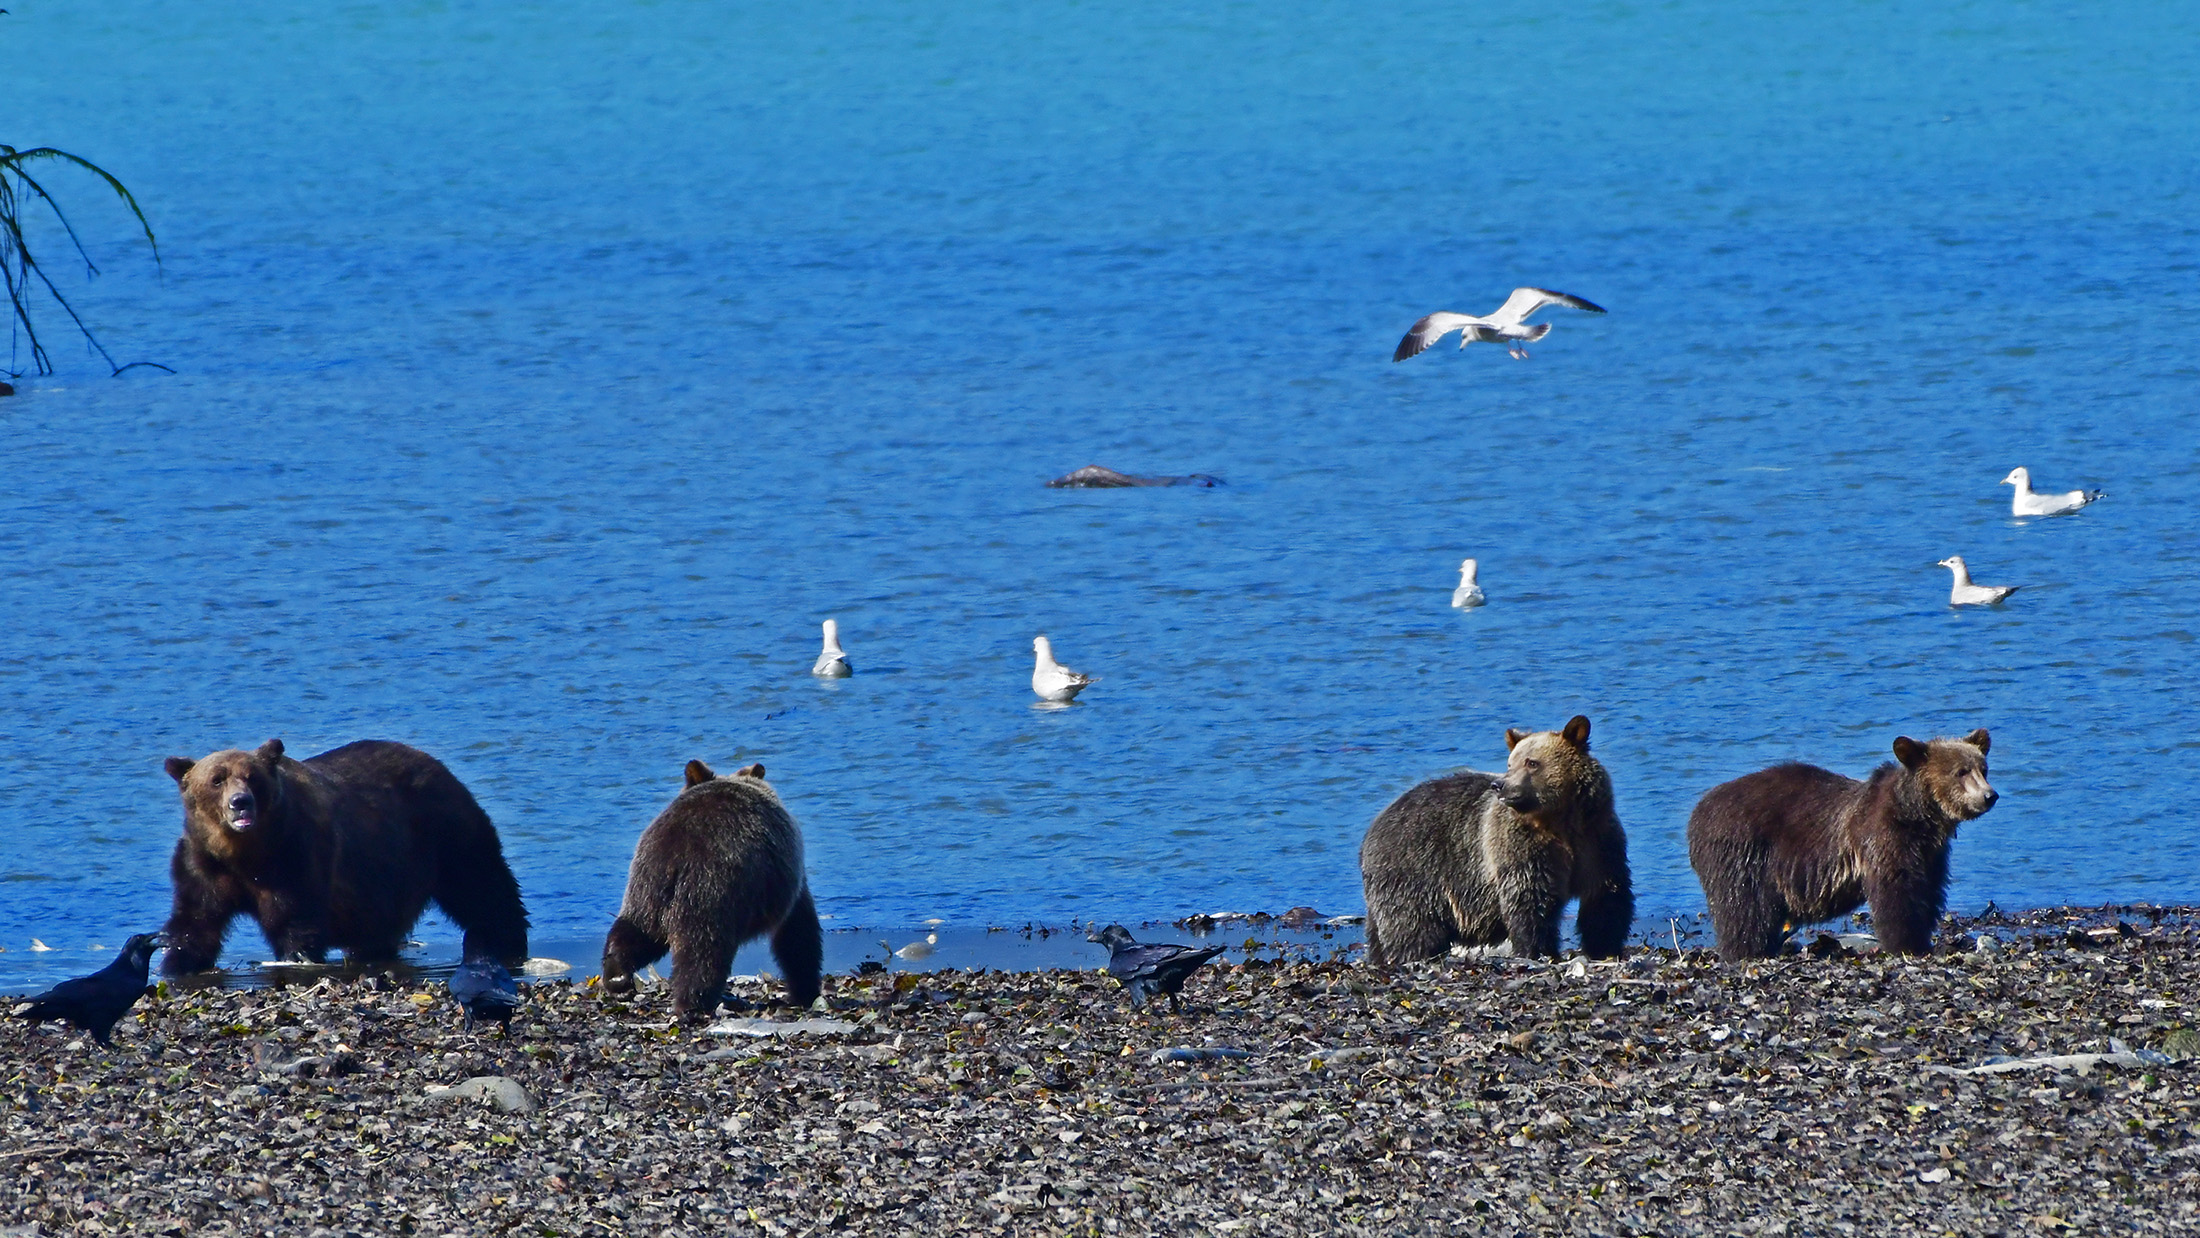 Mother Grizzly Bear and cubs, Orford Bay, BC